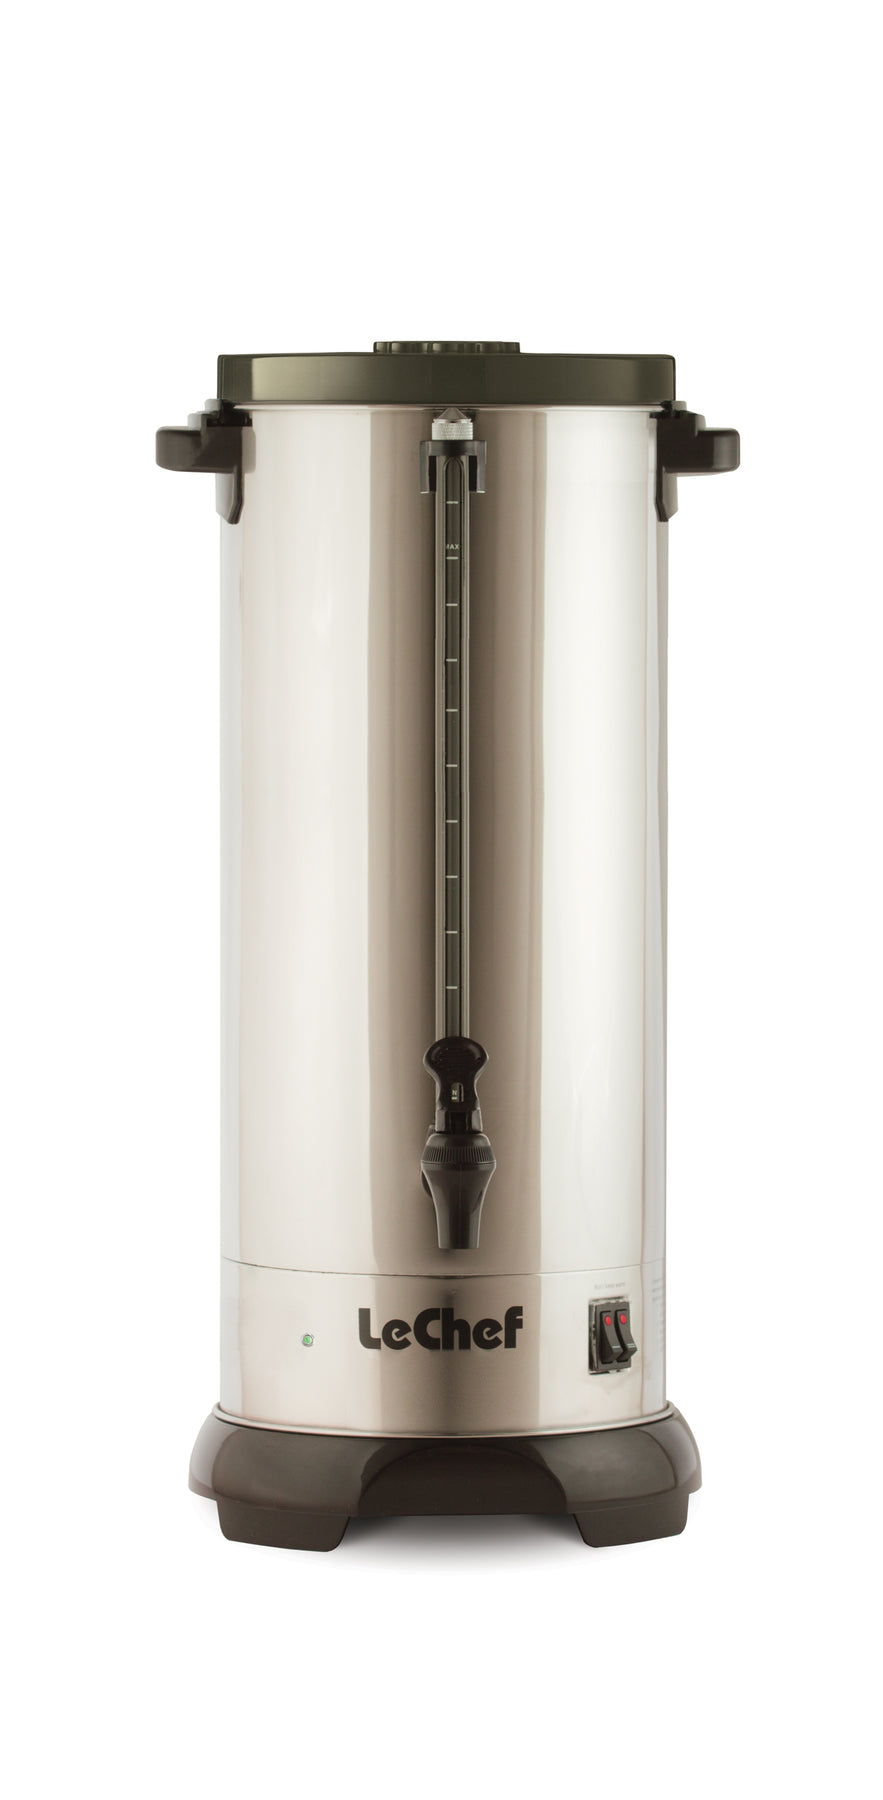 Bon Chef 40510 2.25 Gallon Stainless Steel Milk Can Beverage Dispenser -  Halls International - Specialists in Catering Equipment